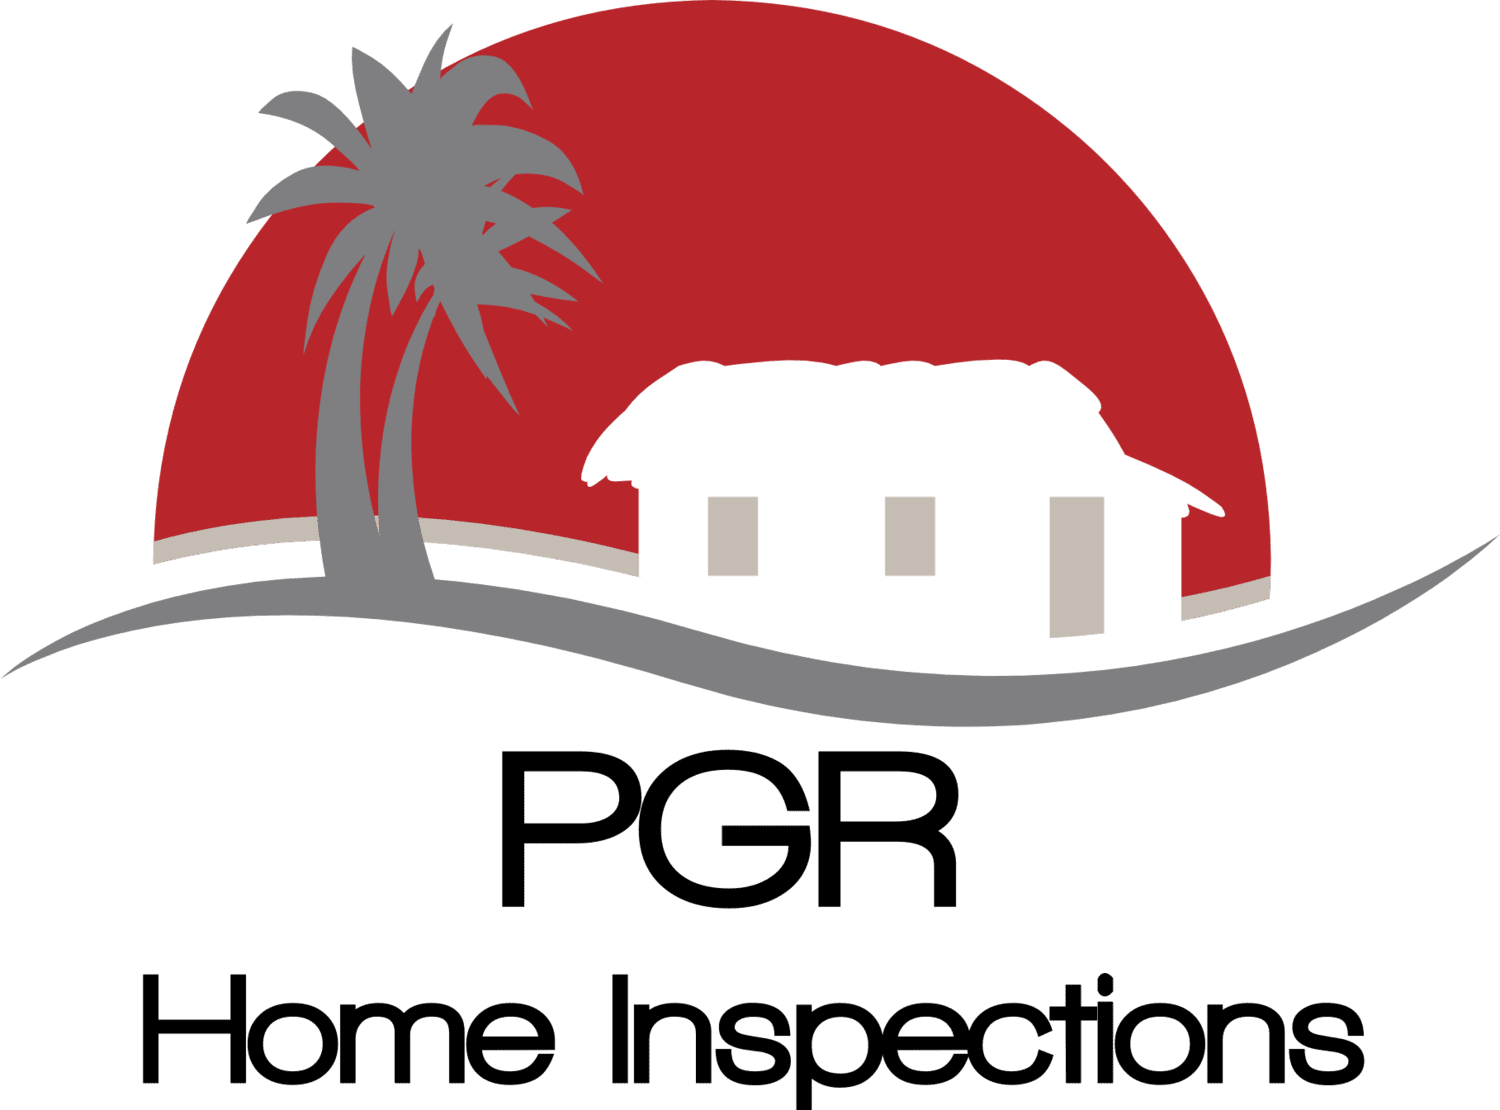 Image of PGR Home Inspections